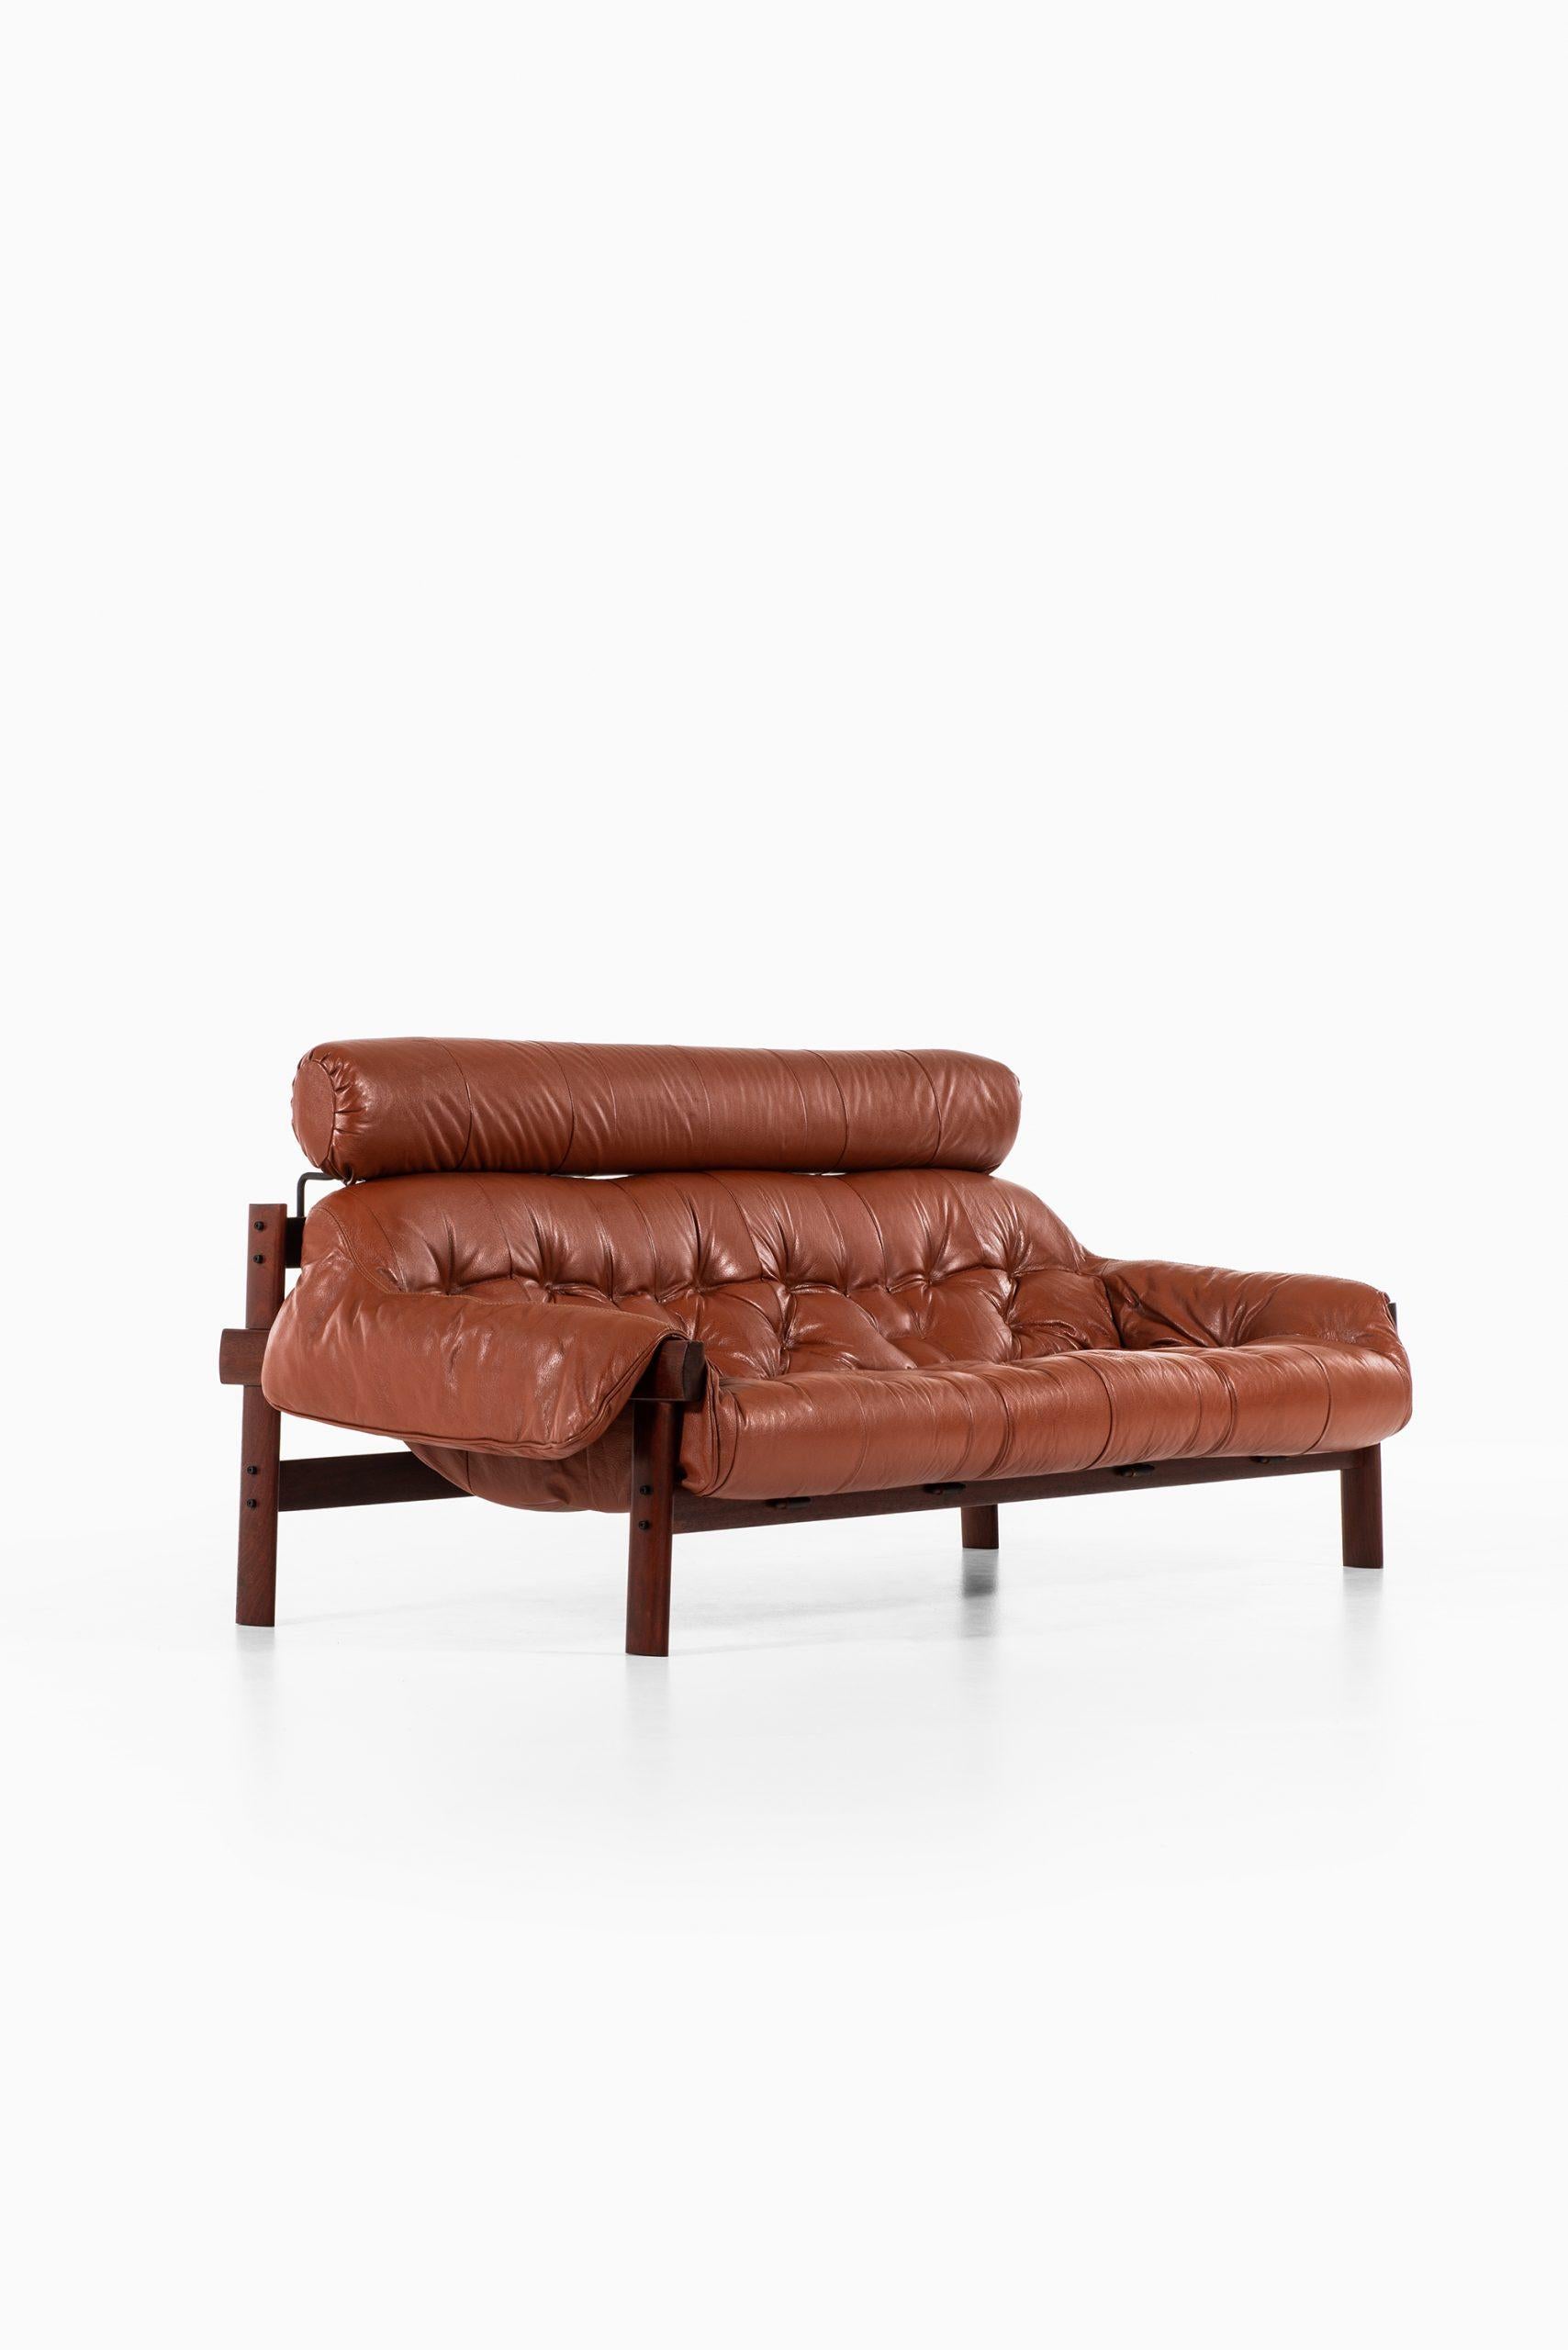 Mid-Century Modern Percival Lafer Seating Group Produced by Lafer MP in Brazil